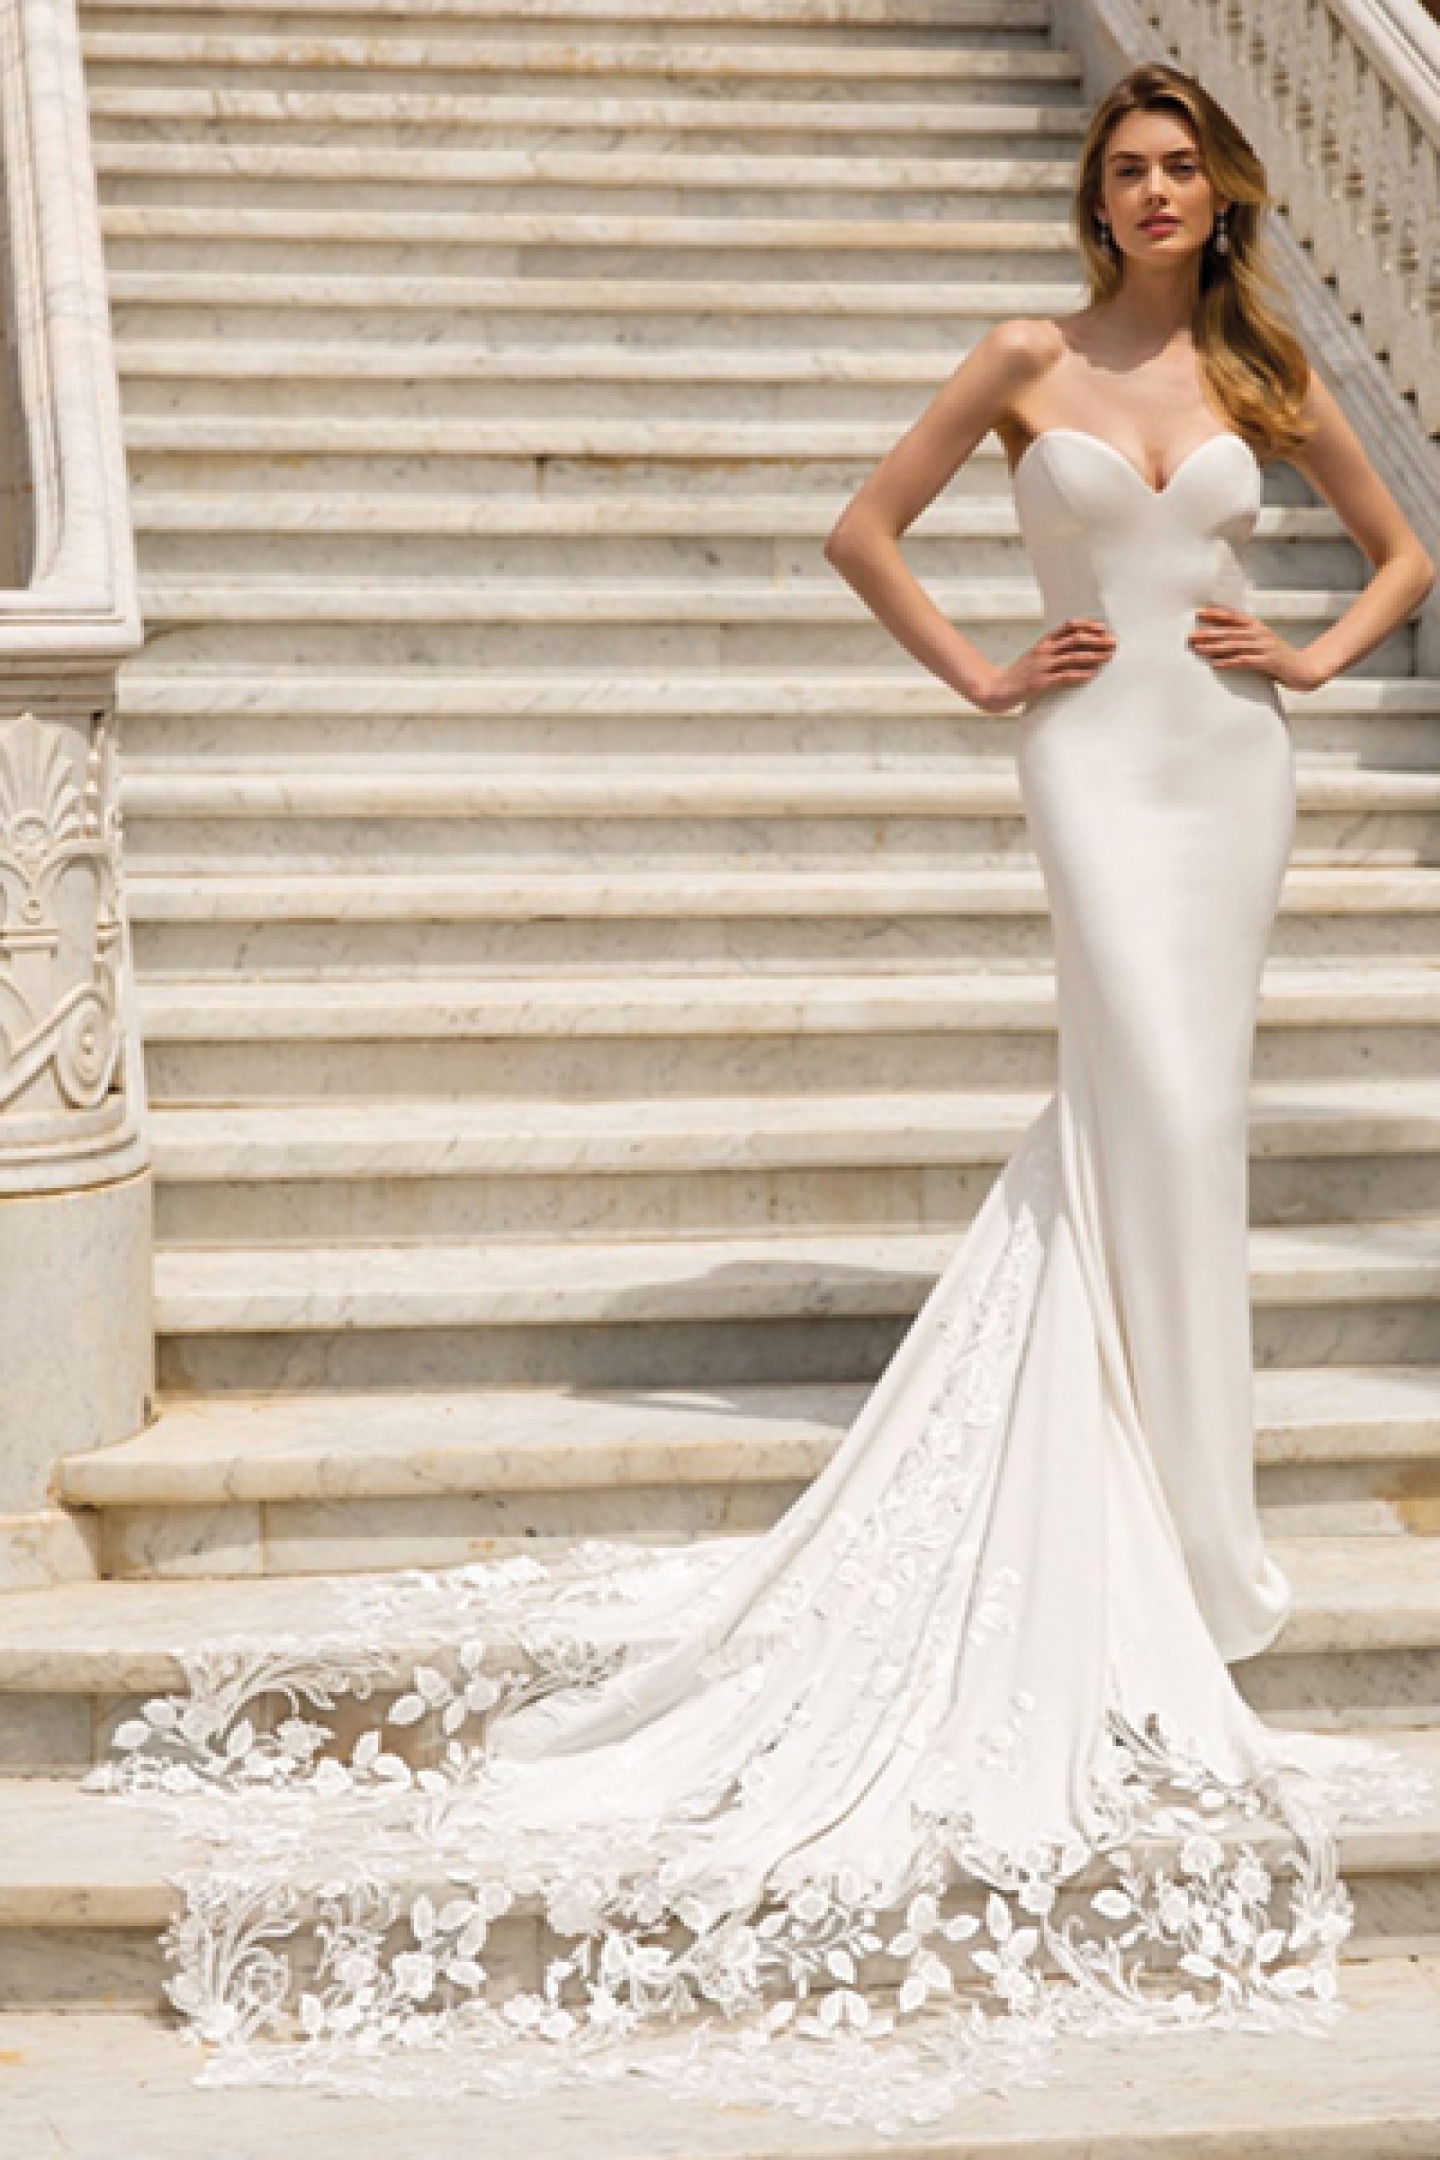 Aisle Style: Finding Your Dream Dress